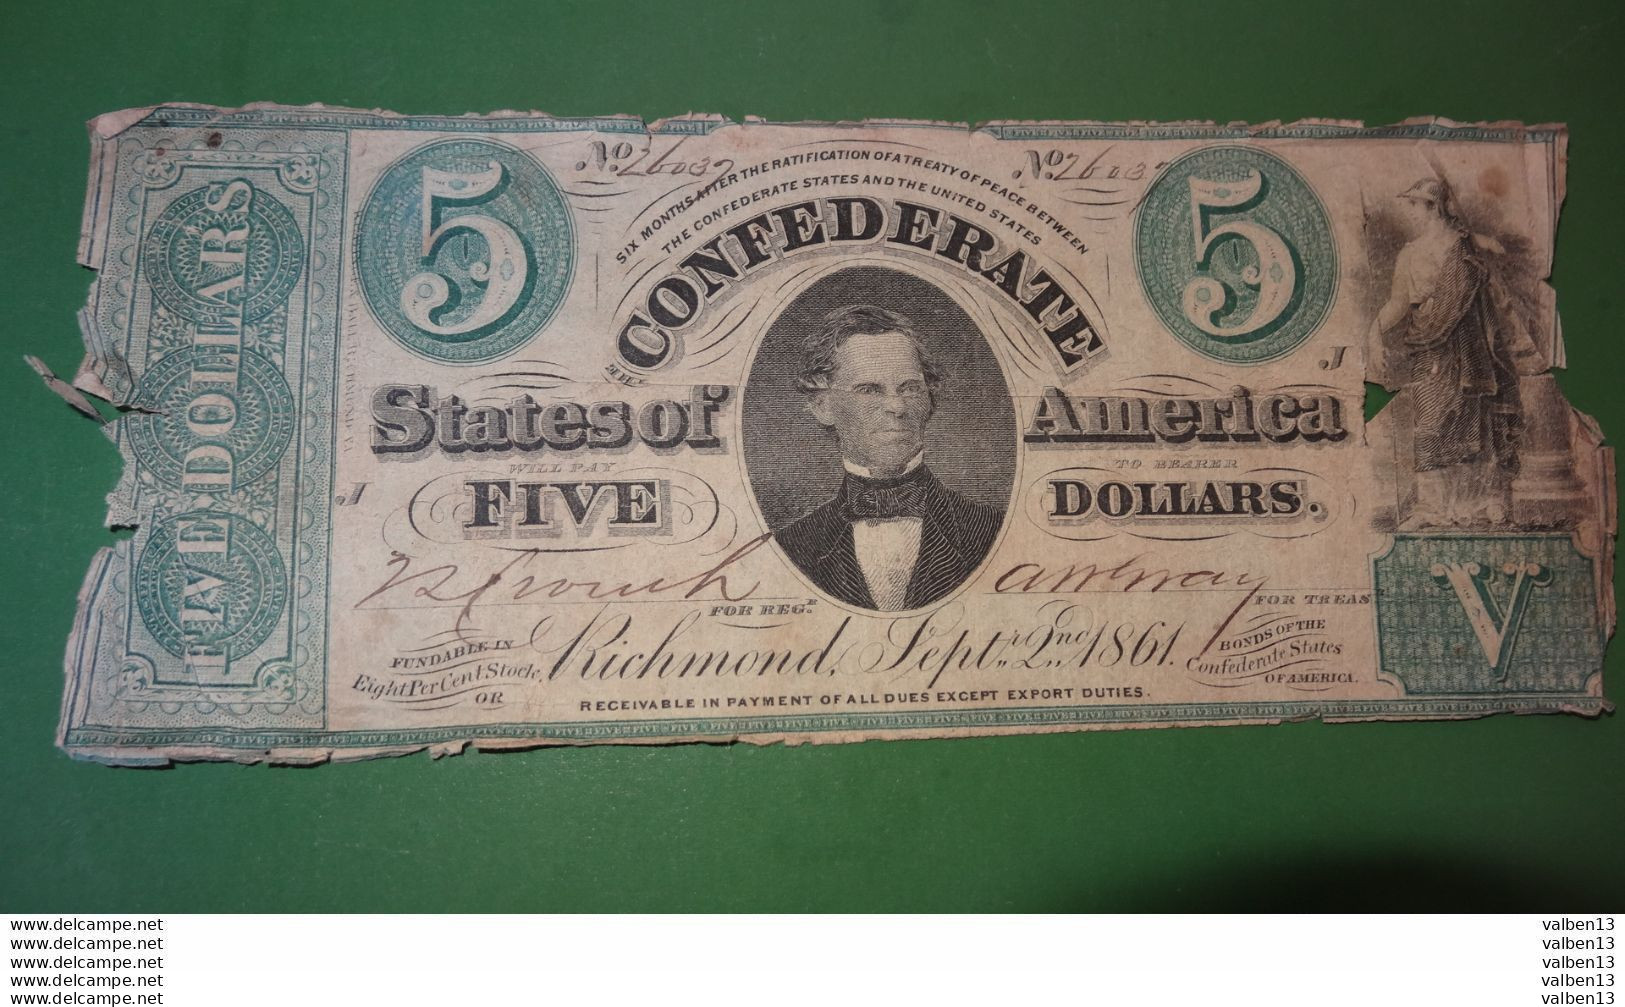 ETATS UNIS: Confederates States Of America. N° 26037, 5 Dollars. Date 02/09/1861 ........ Env.2 - Confederate Currency (1861-1864)